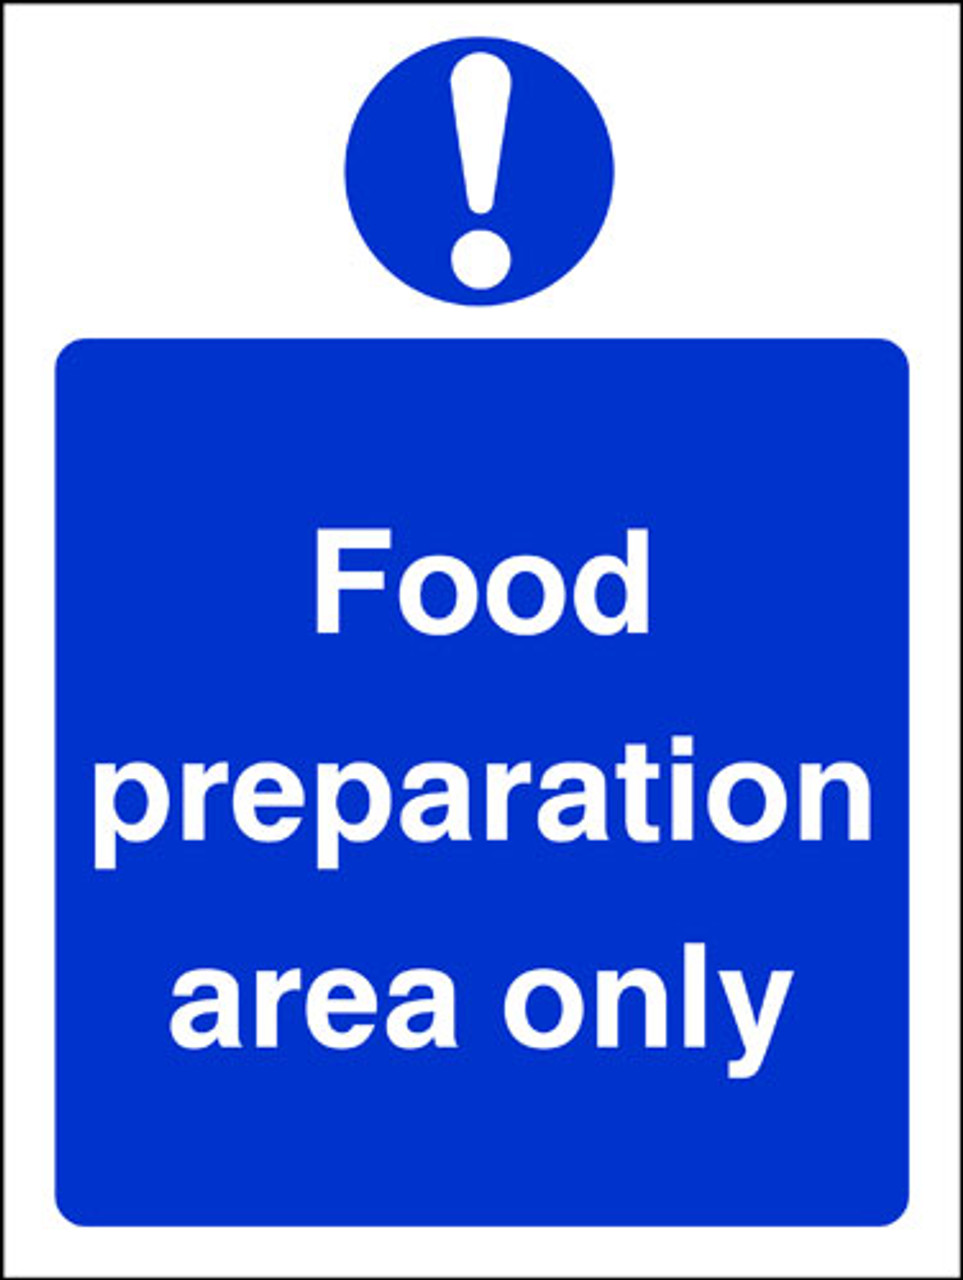 Food preparation area only